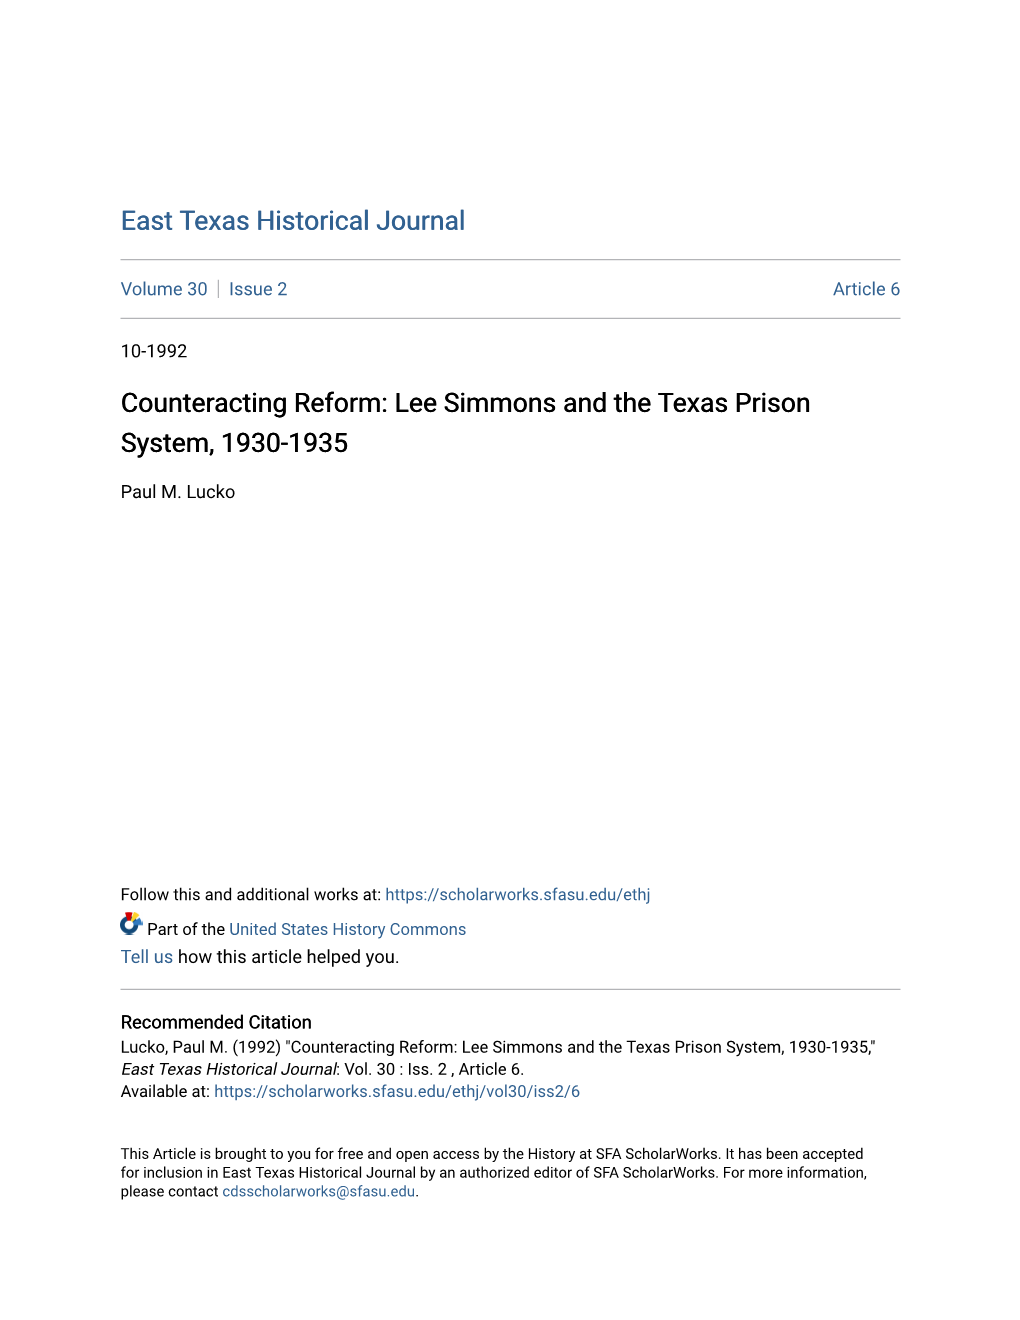 Lee Simmons and the Texas Prison System, 1930-1935